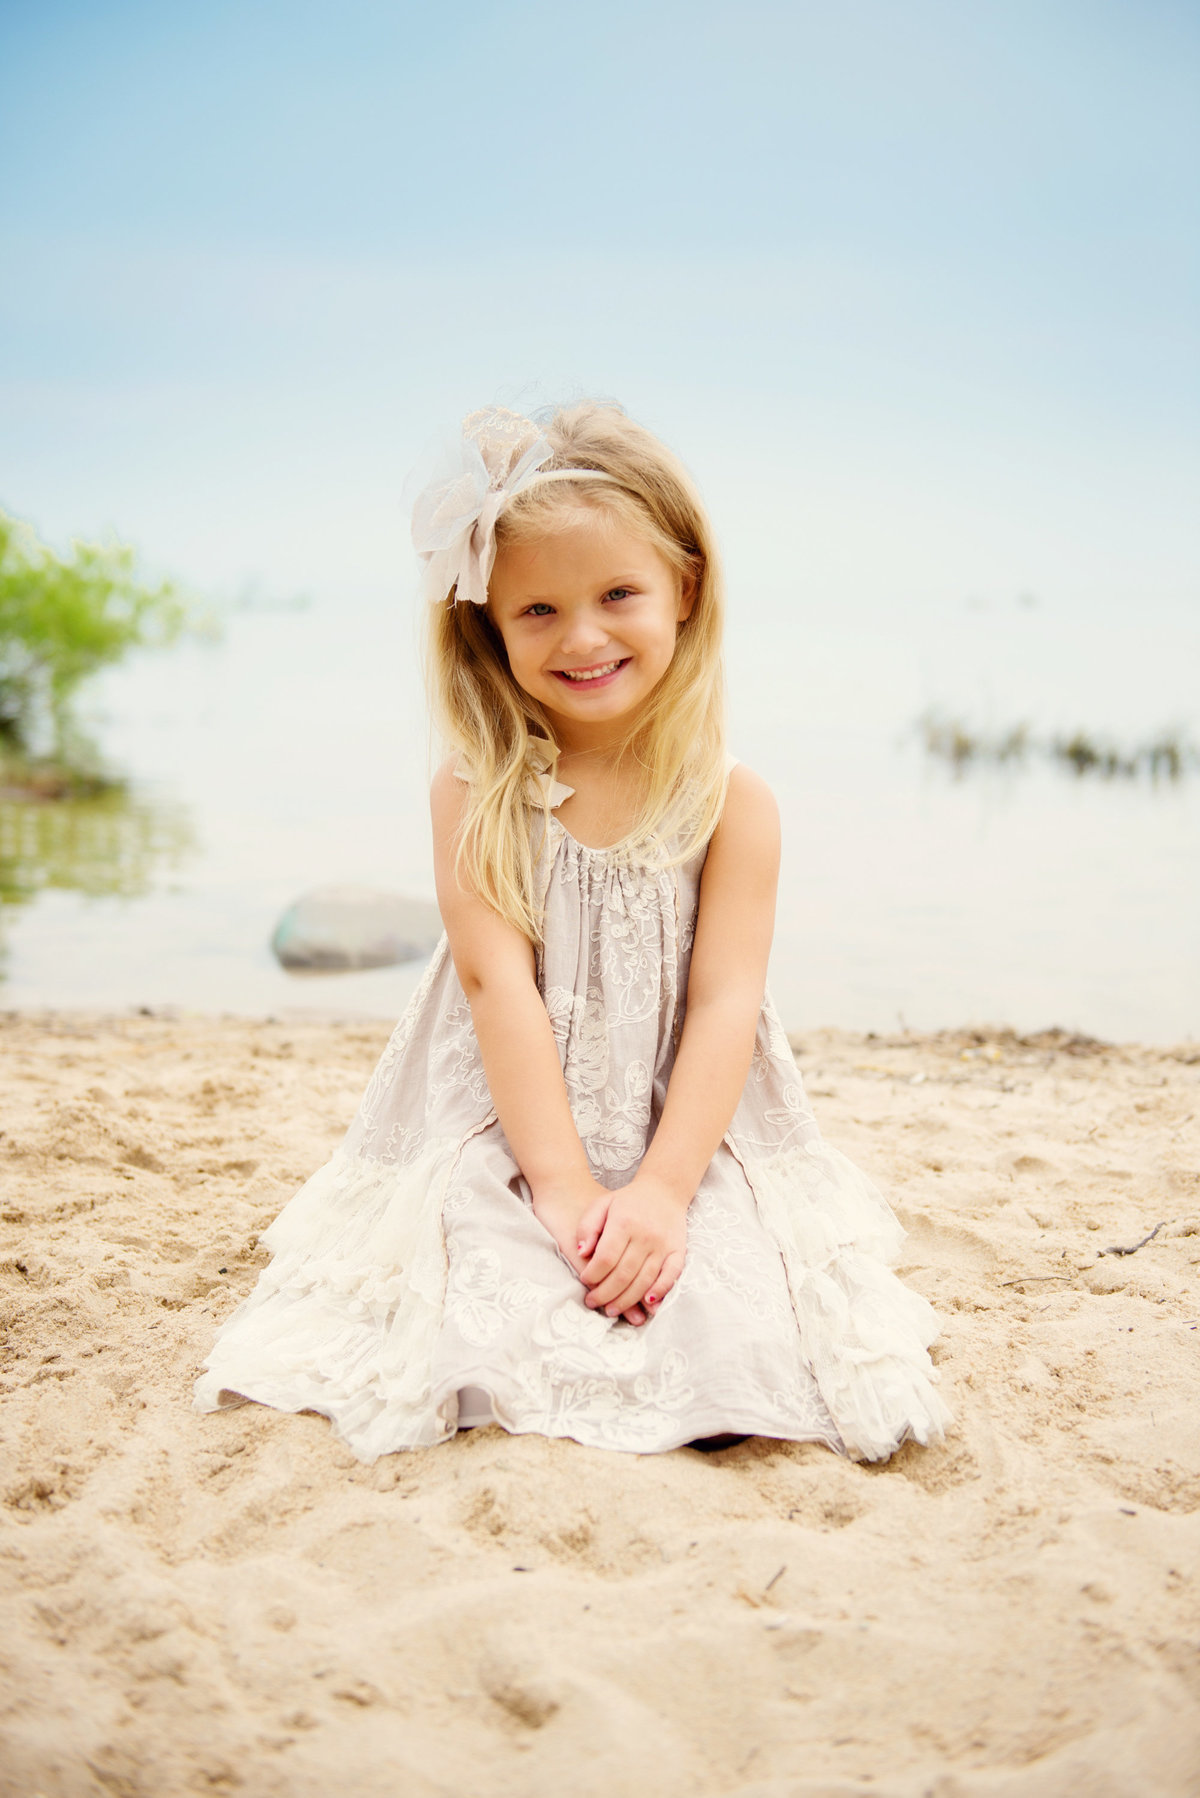 beach family portrait photography in northern michigan